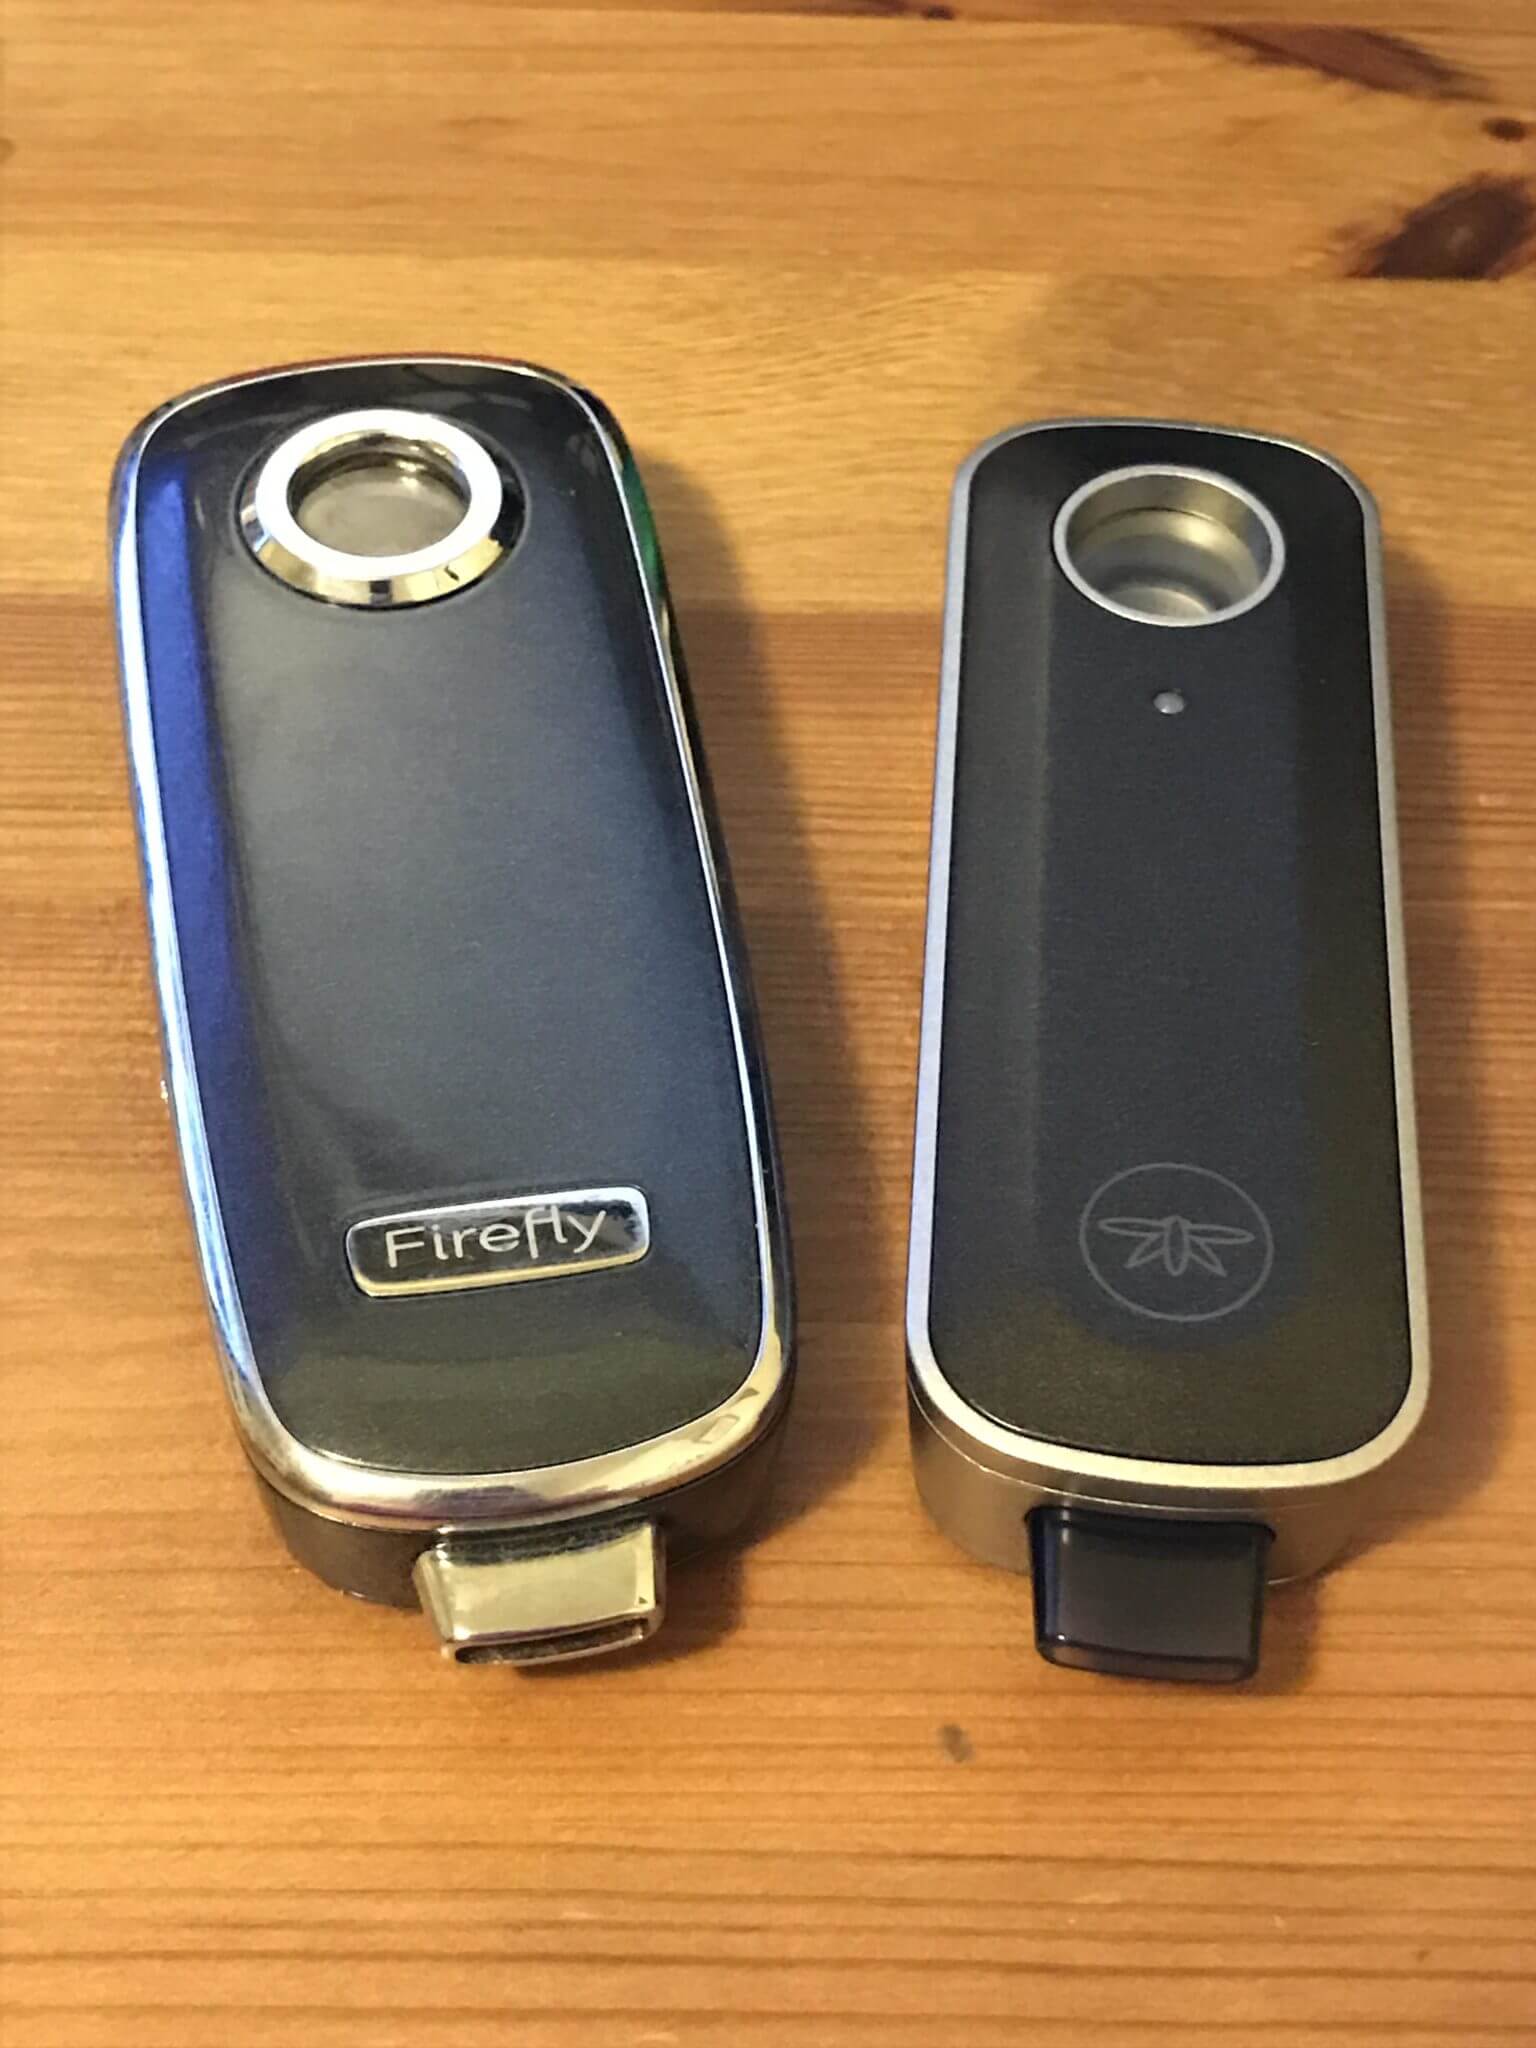 Comparing the Original Firefly Vaporizer to the Firefly 2